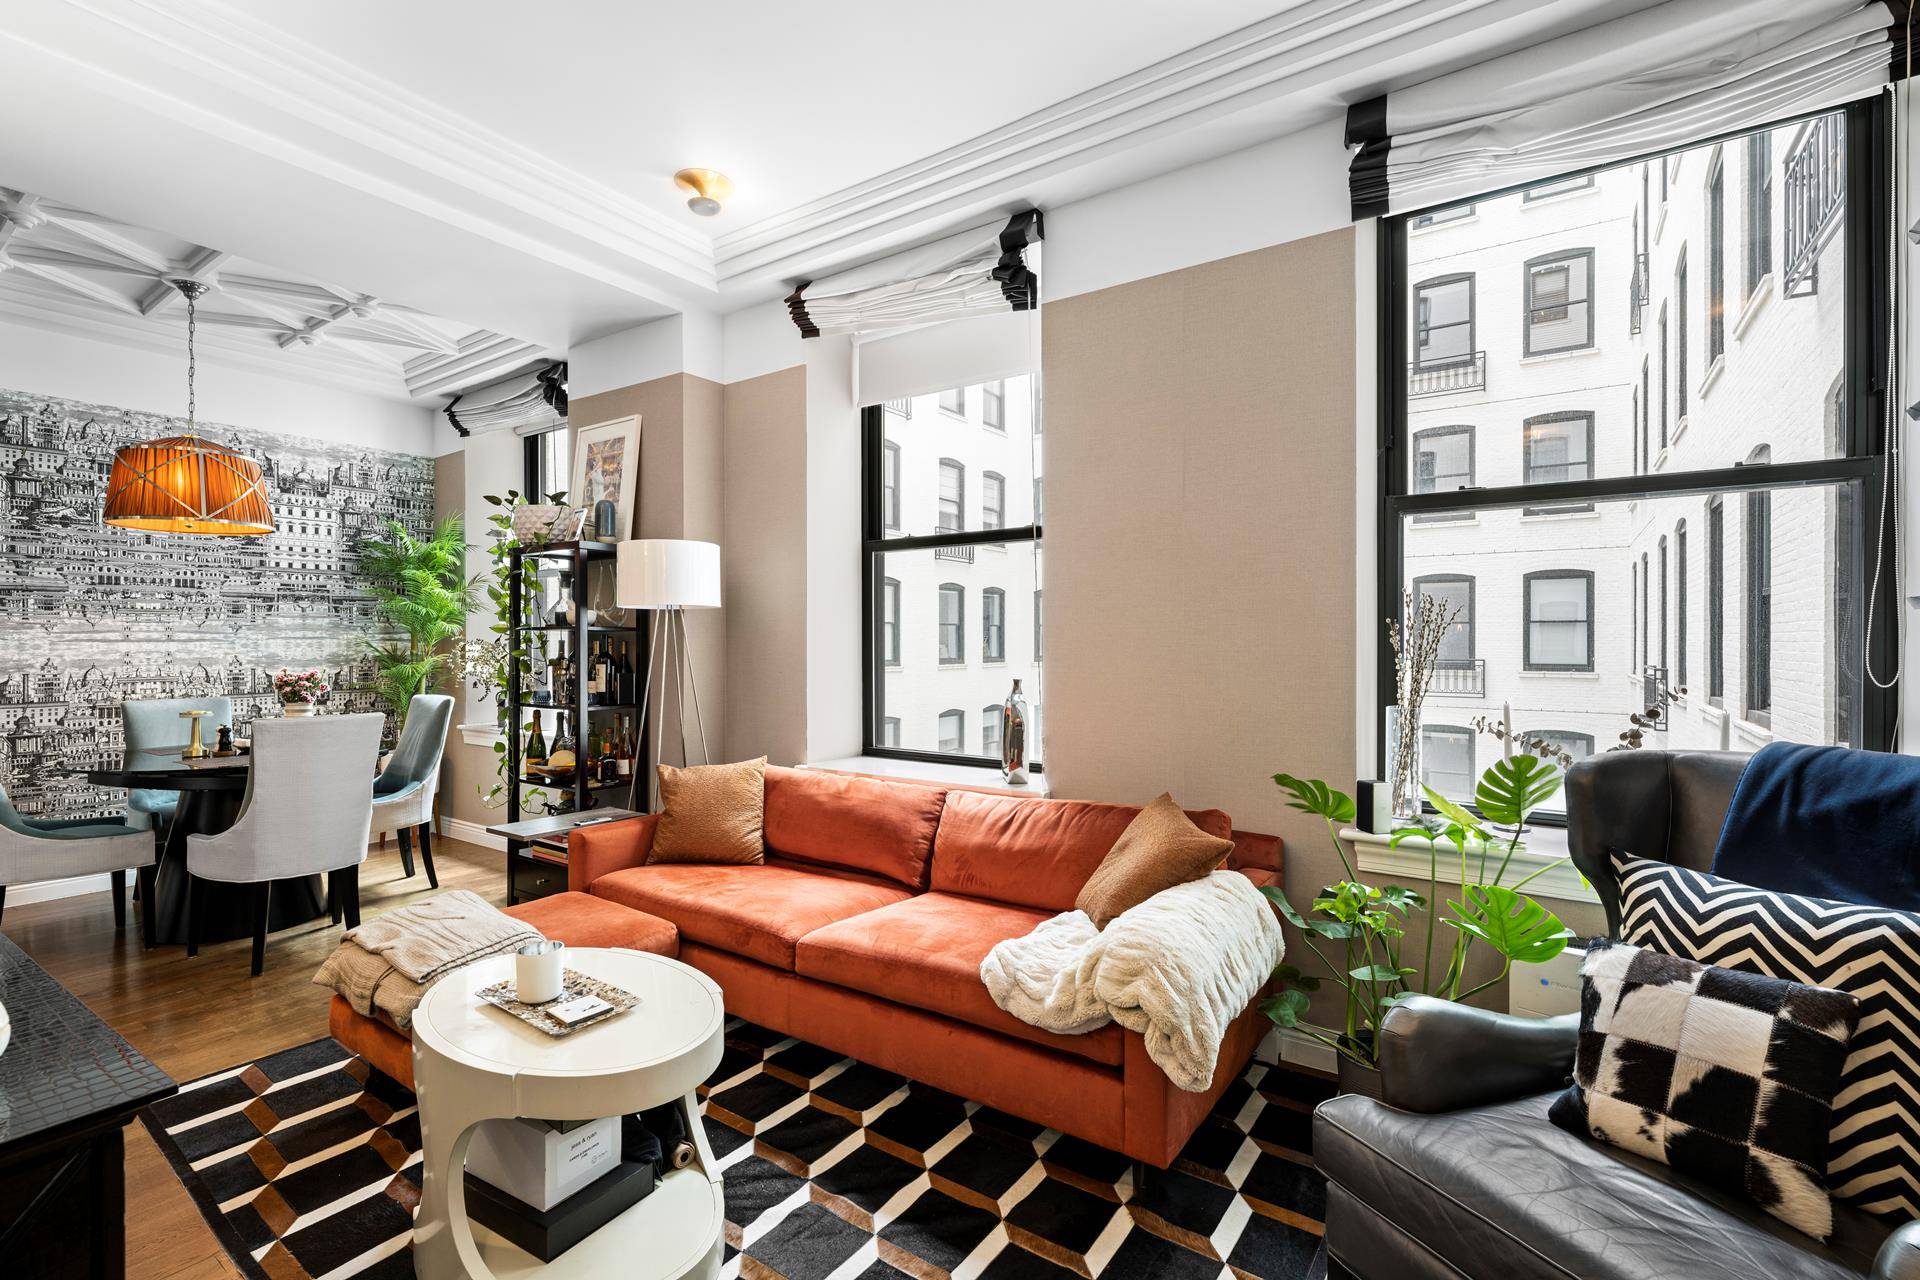 Welcome home to this incredible south facing one bedroom loft condominium.